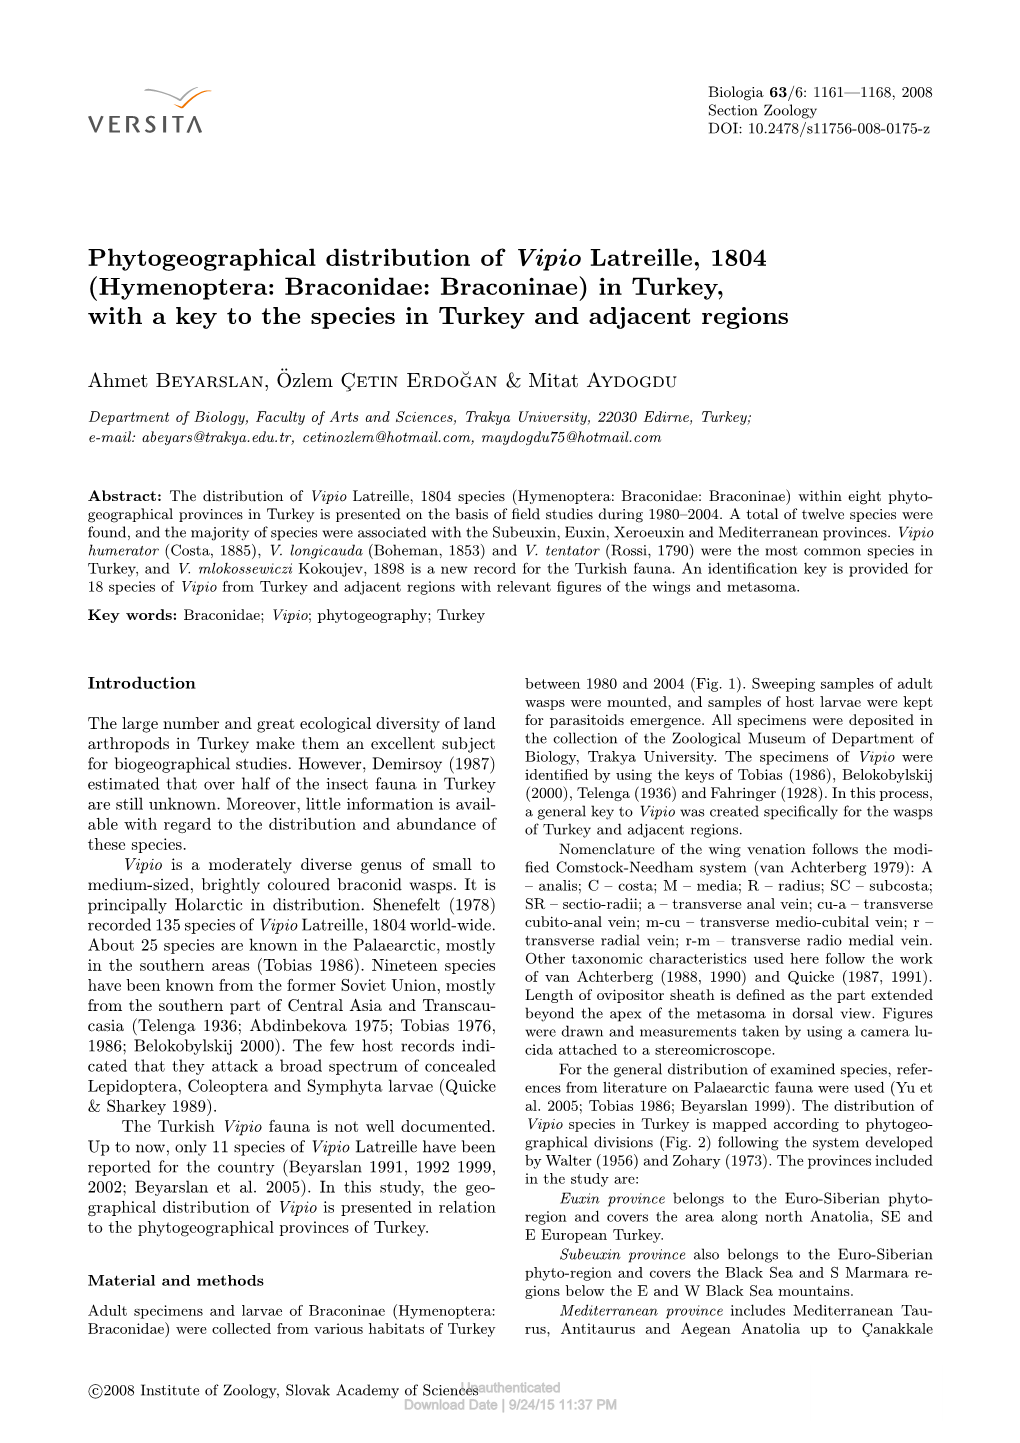 Phytogeographical Distribution of Vipio Latreille, 1804 (Hymenoptera: Braconidae: Braconinae) in Turkey, with a Key to the Species in Turkey and Adjacent Regions